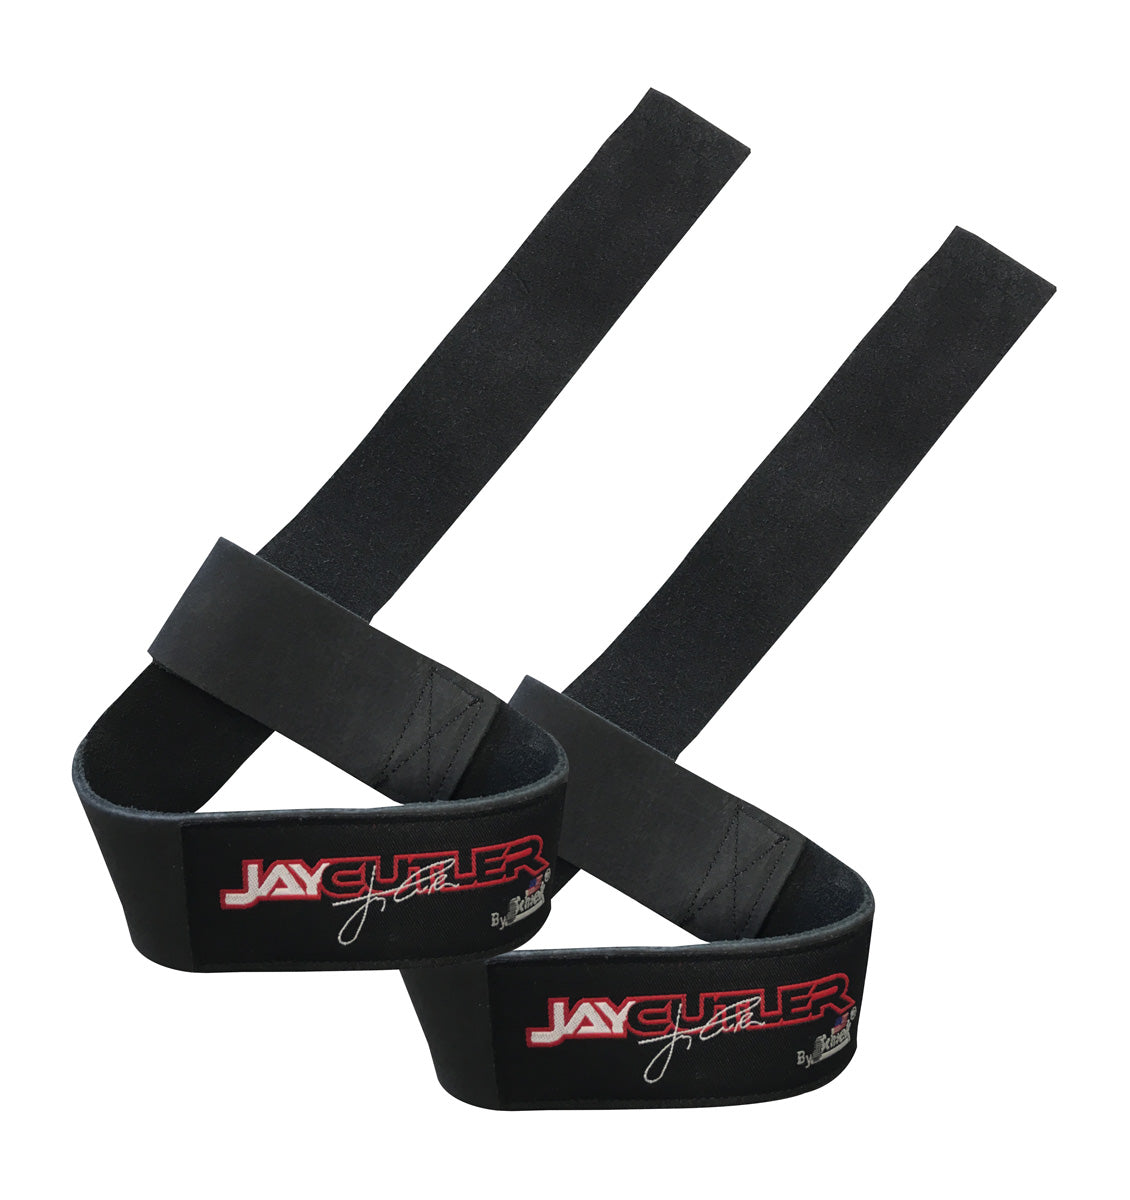 Jay Cutler Leather Lifting Straps by Schiek - 1